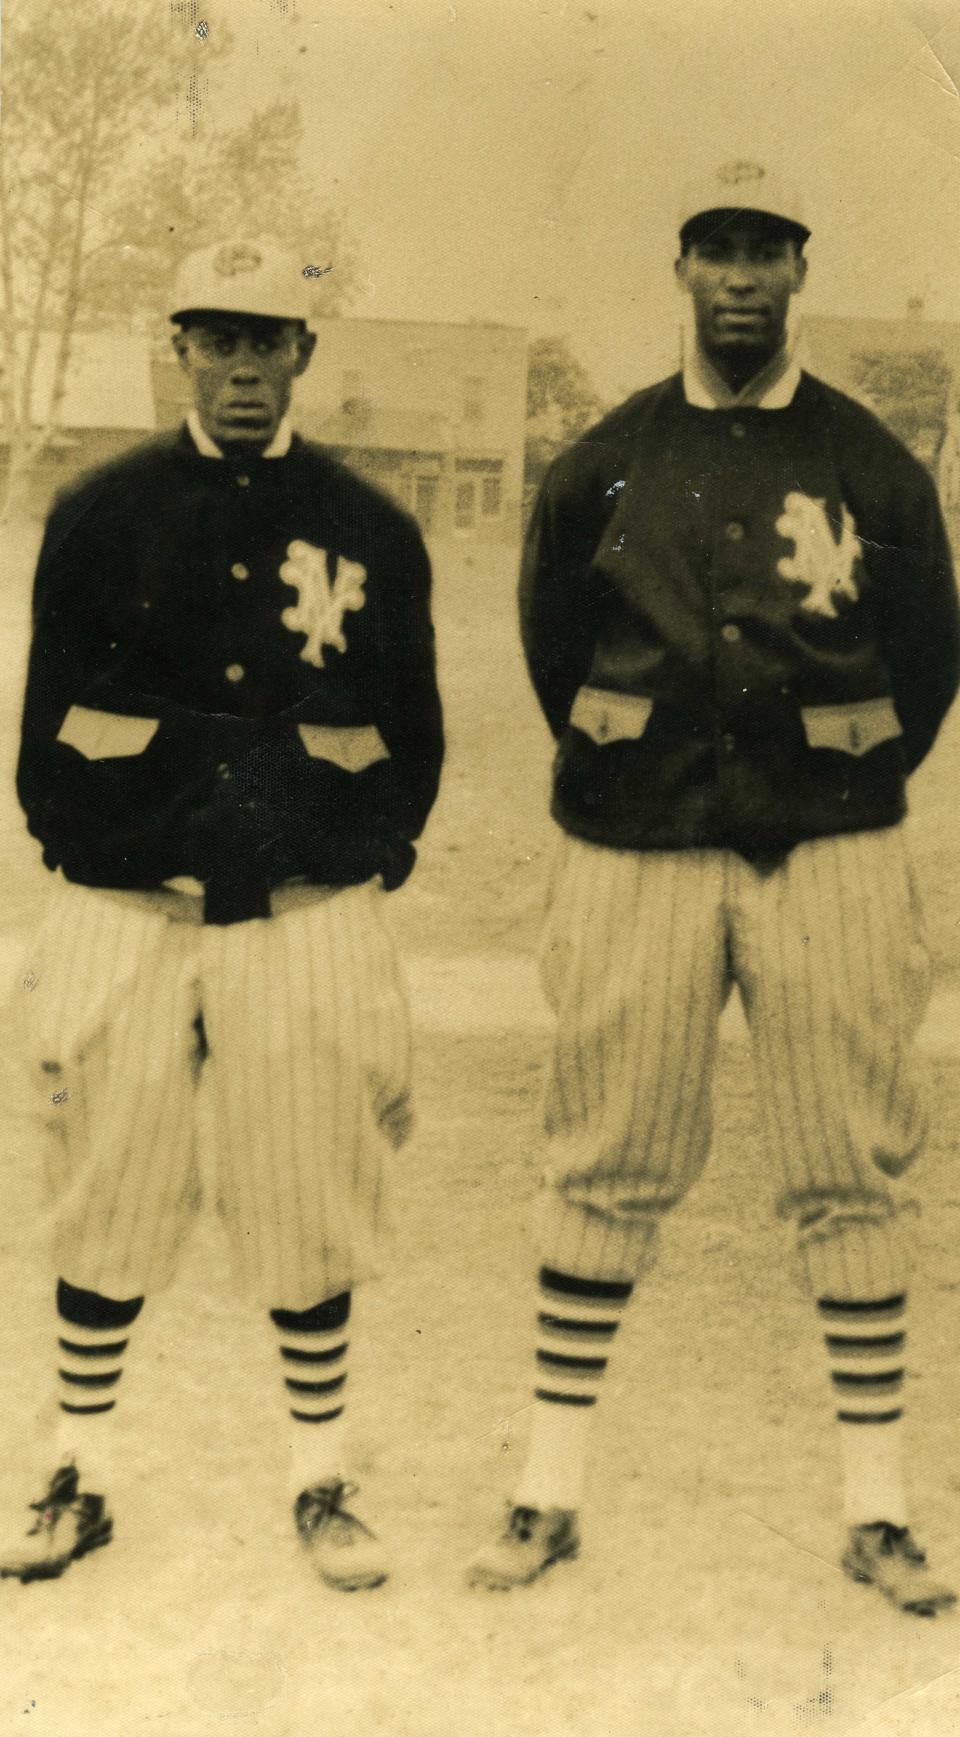 Martín Dihigo (right) with teammate Alejandro Oms with the New York Cubans in 1935.